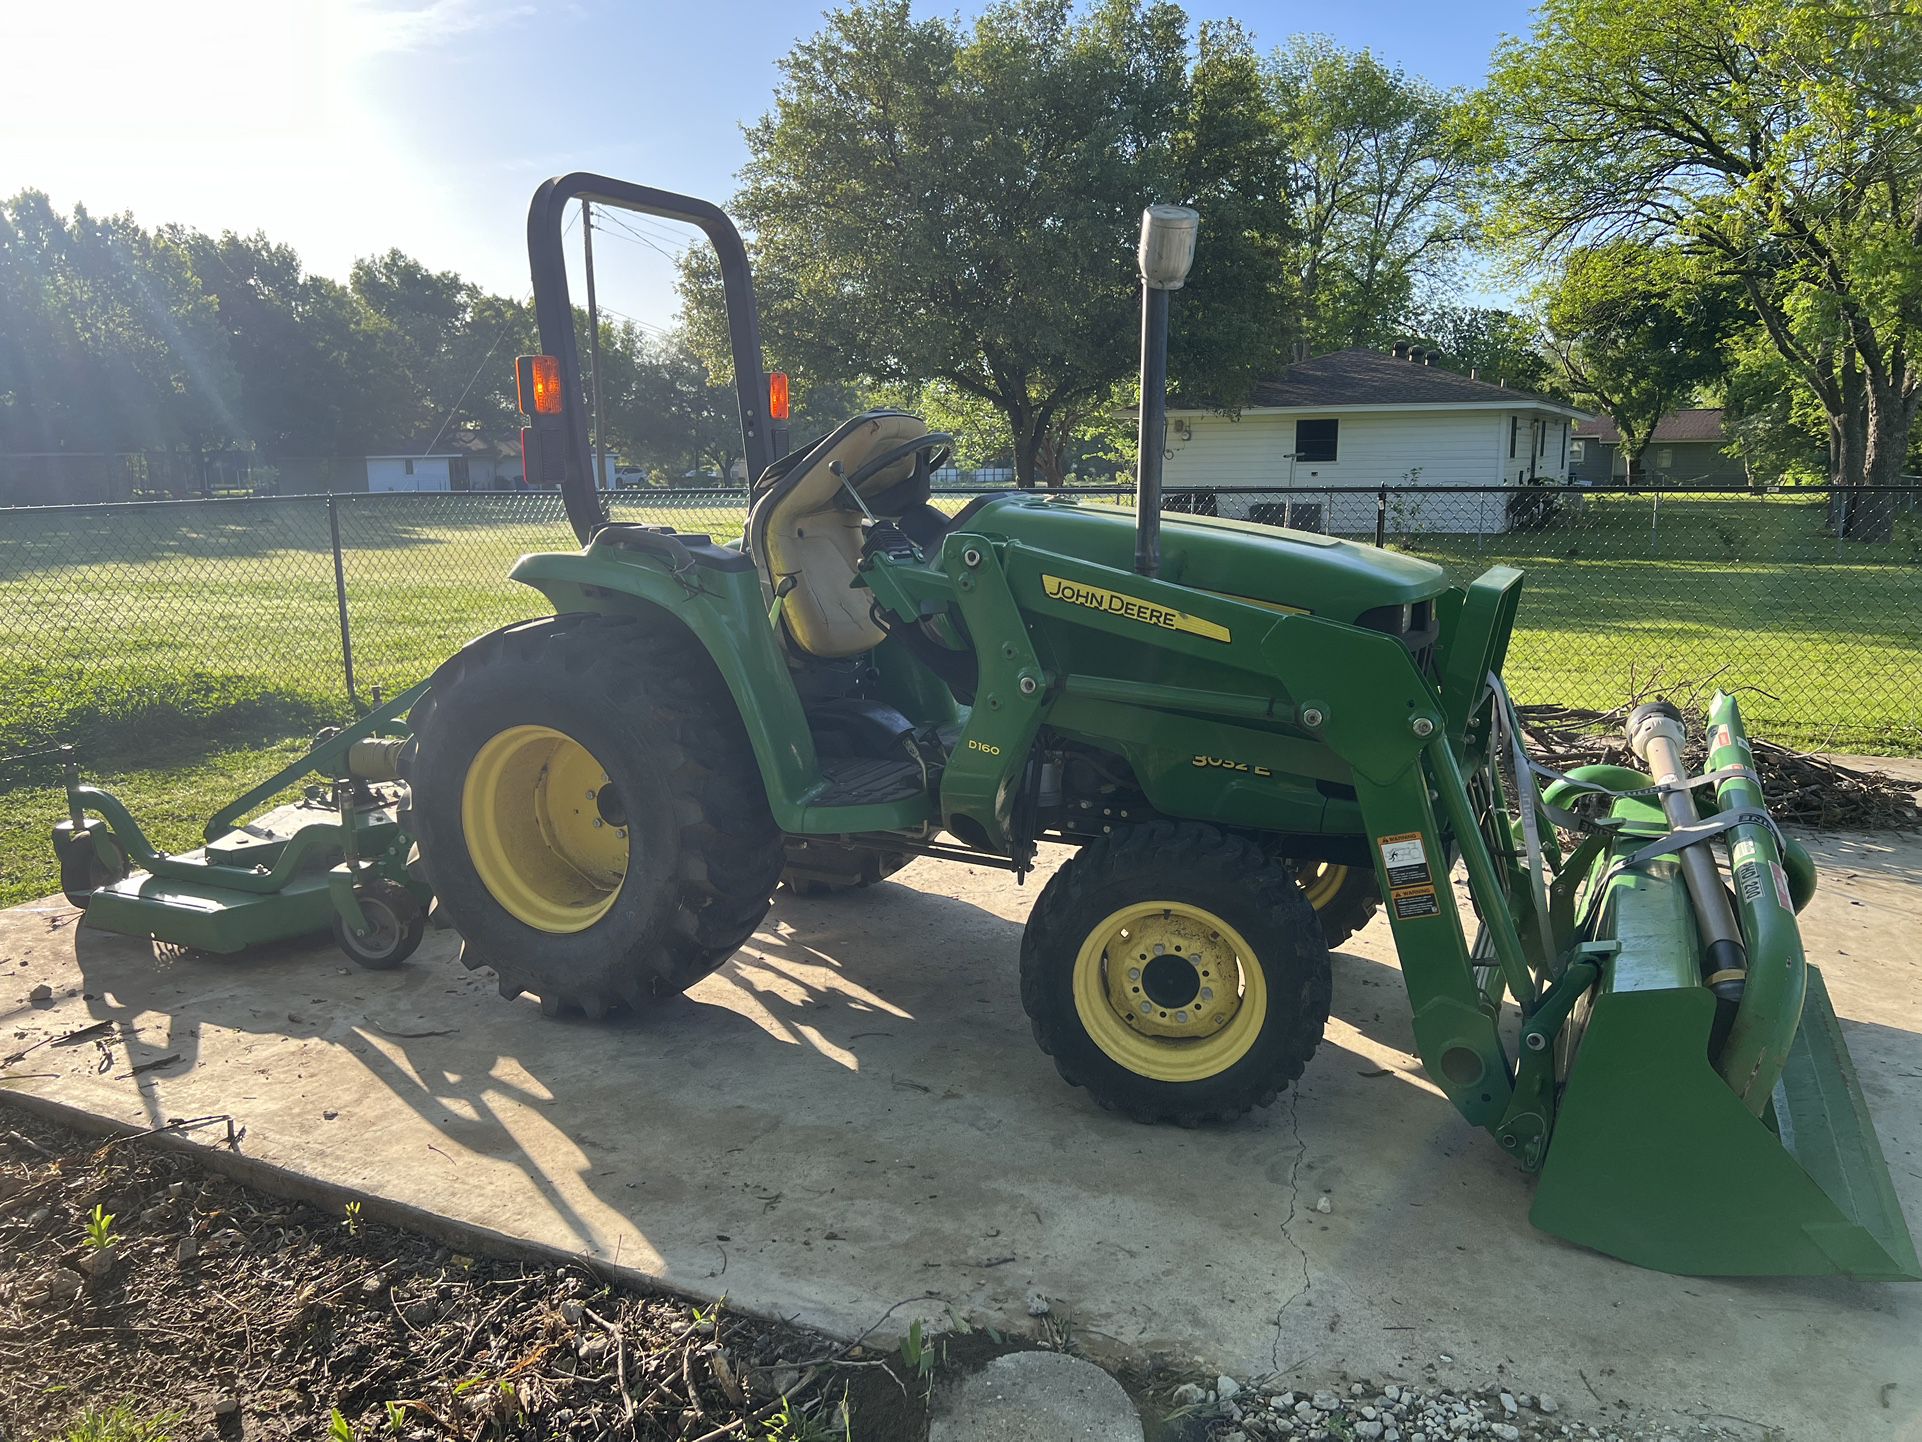 2014 John Deere 3032e tractor with front loader, grooming mower and post hole digger